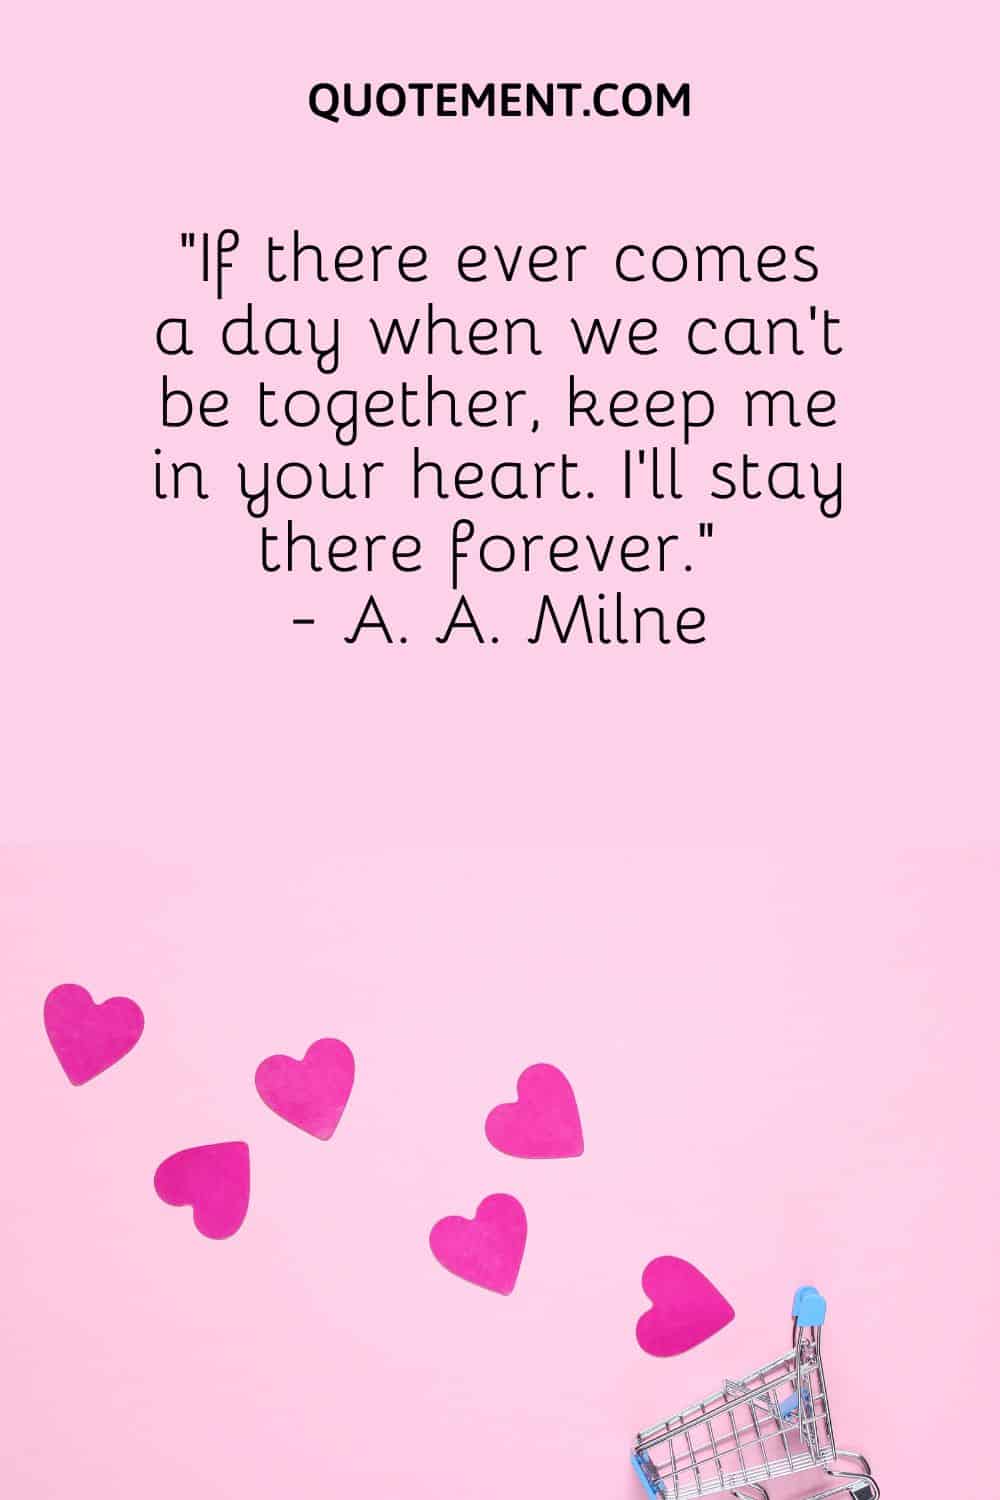 “If there ever comes a day when we can’t be together, keep me in your heart. I’ll stay there forever.” - A. A. Milne